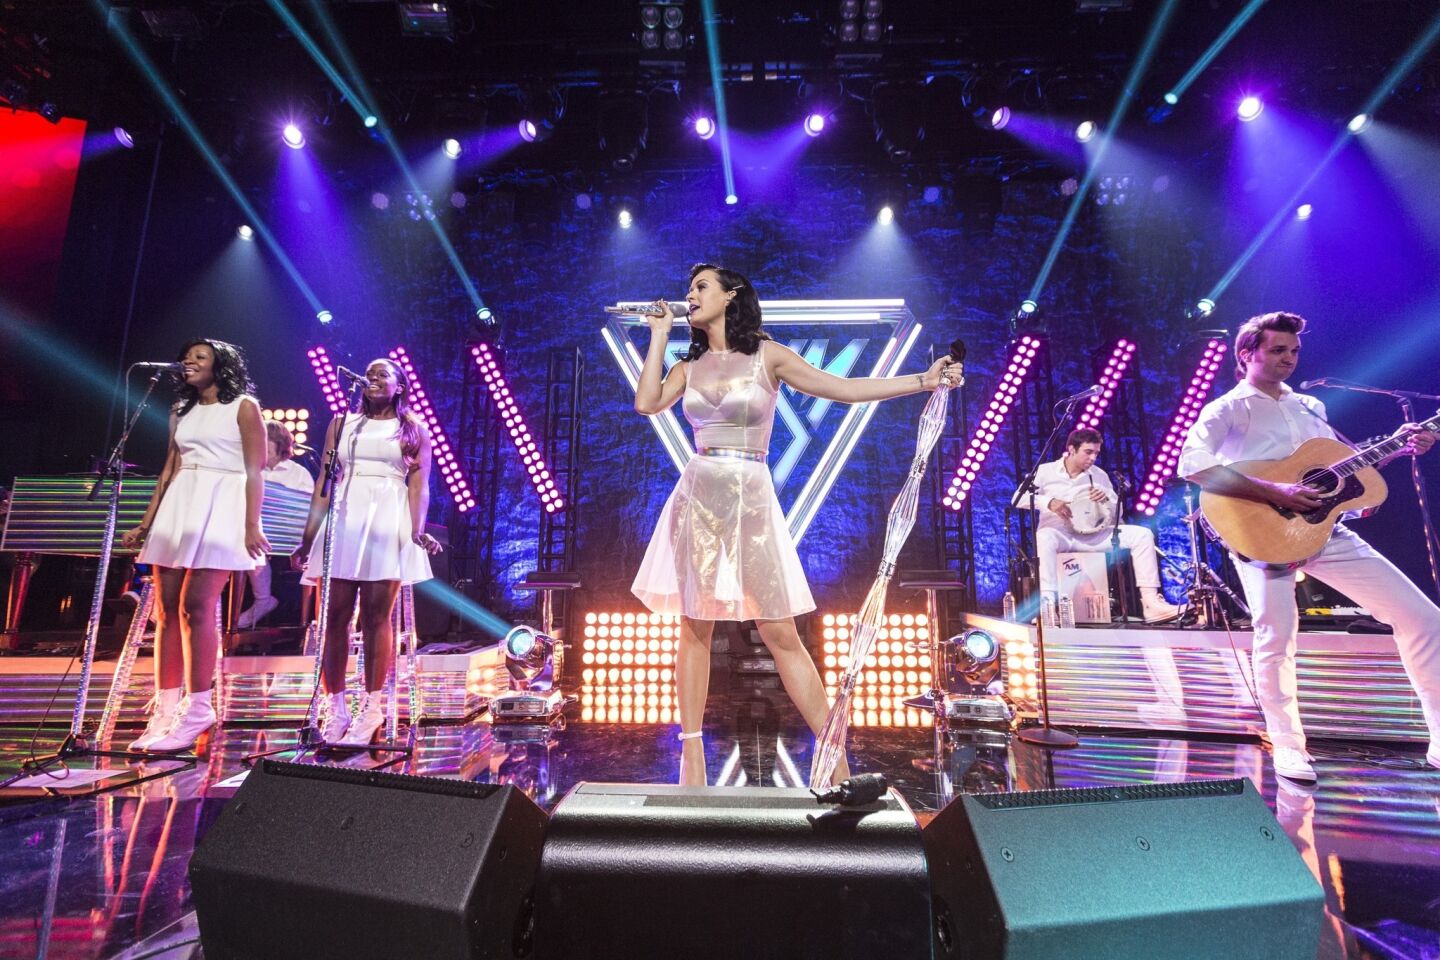 Katy Perry shimmers onstage at the Katy Perry iHeartRadio album release party in Los Angeles.